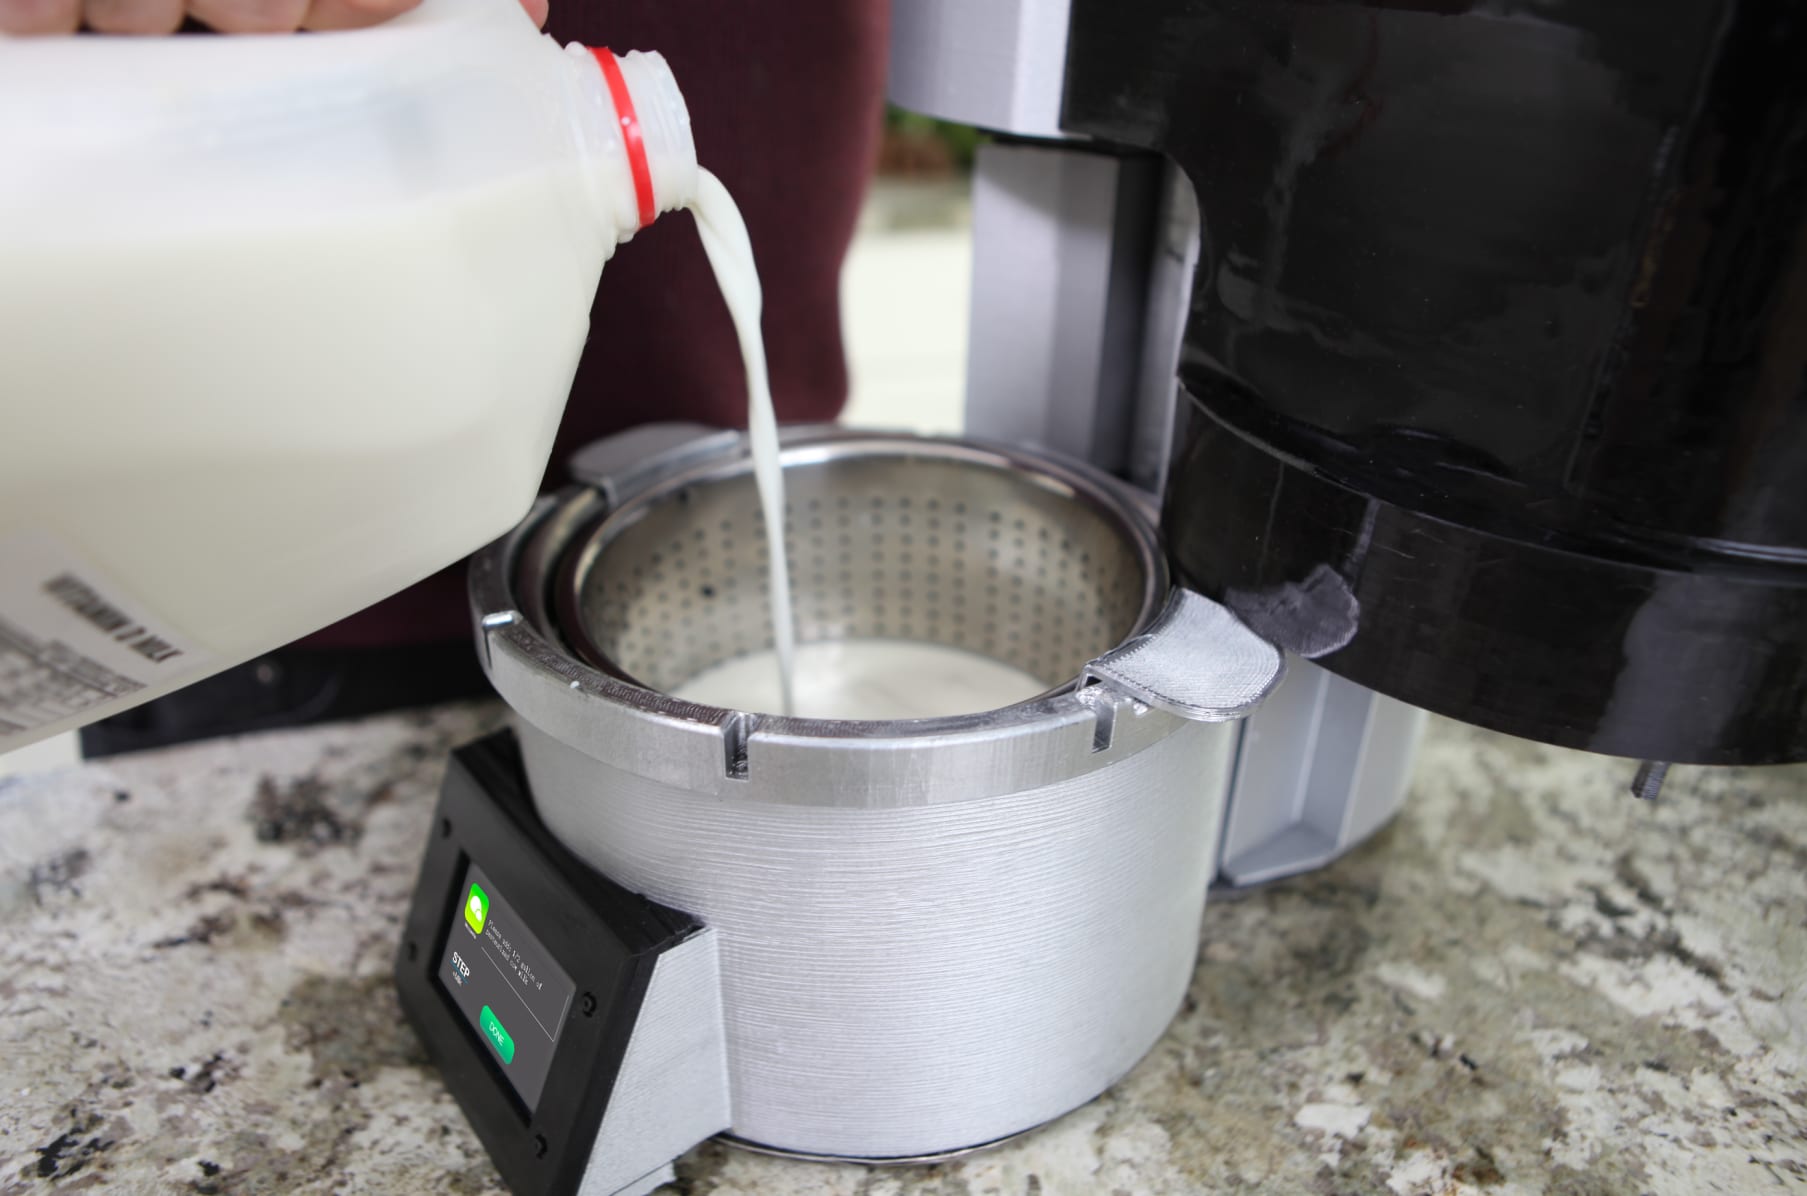 Fromaggio: A smart, automatic home cheesemaker